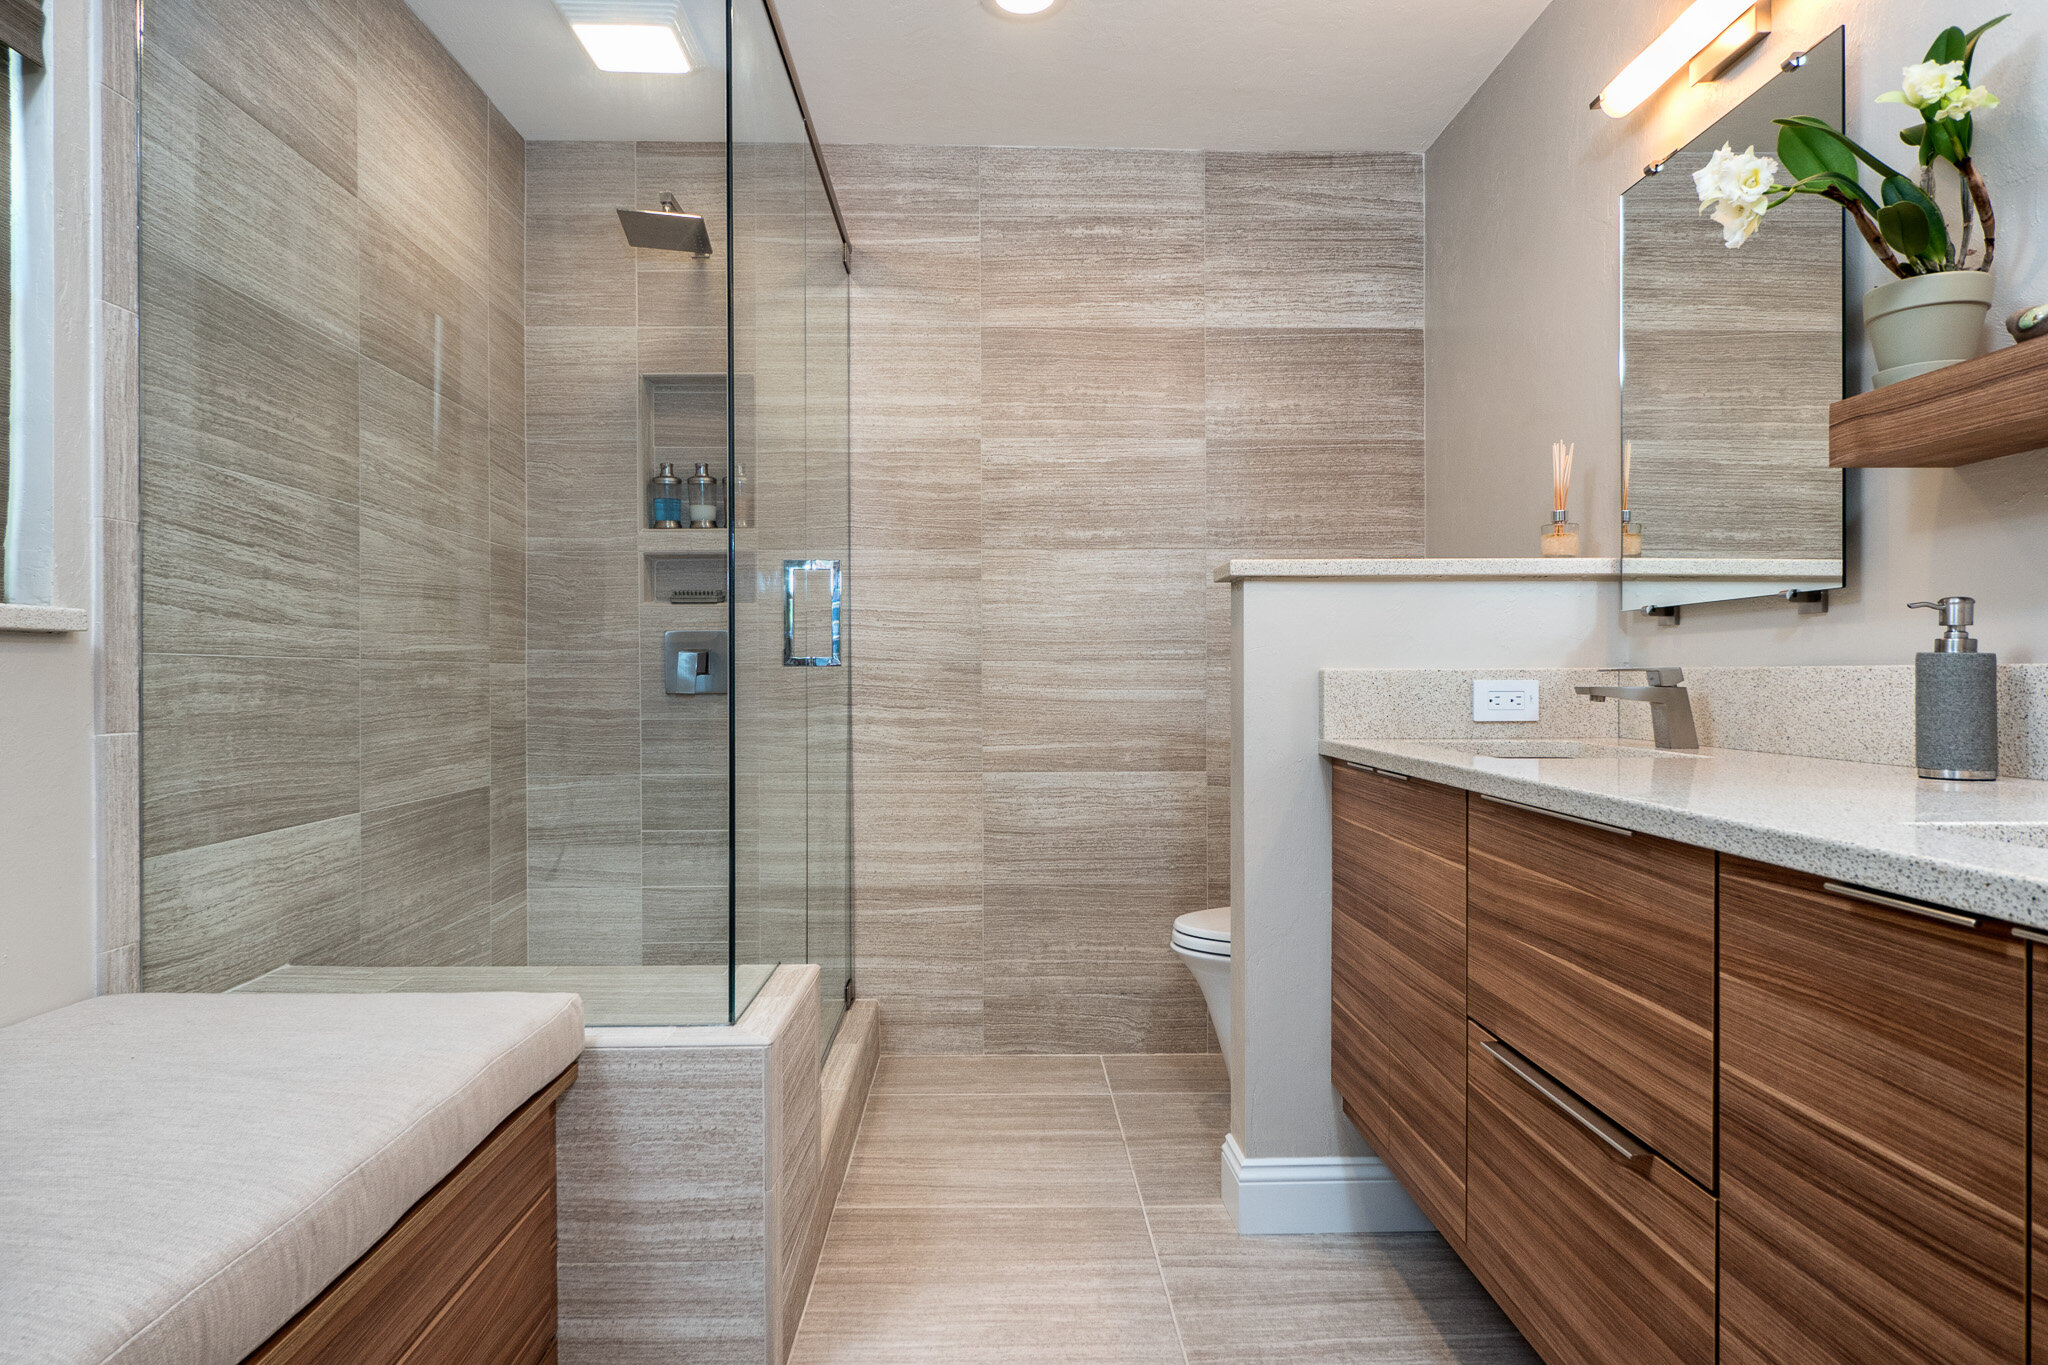 bath design with large format tile and slab cabinetry